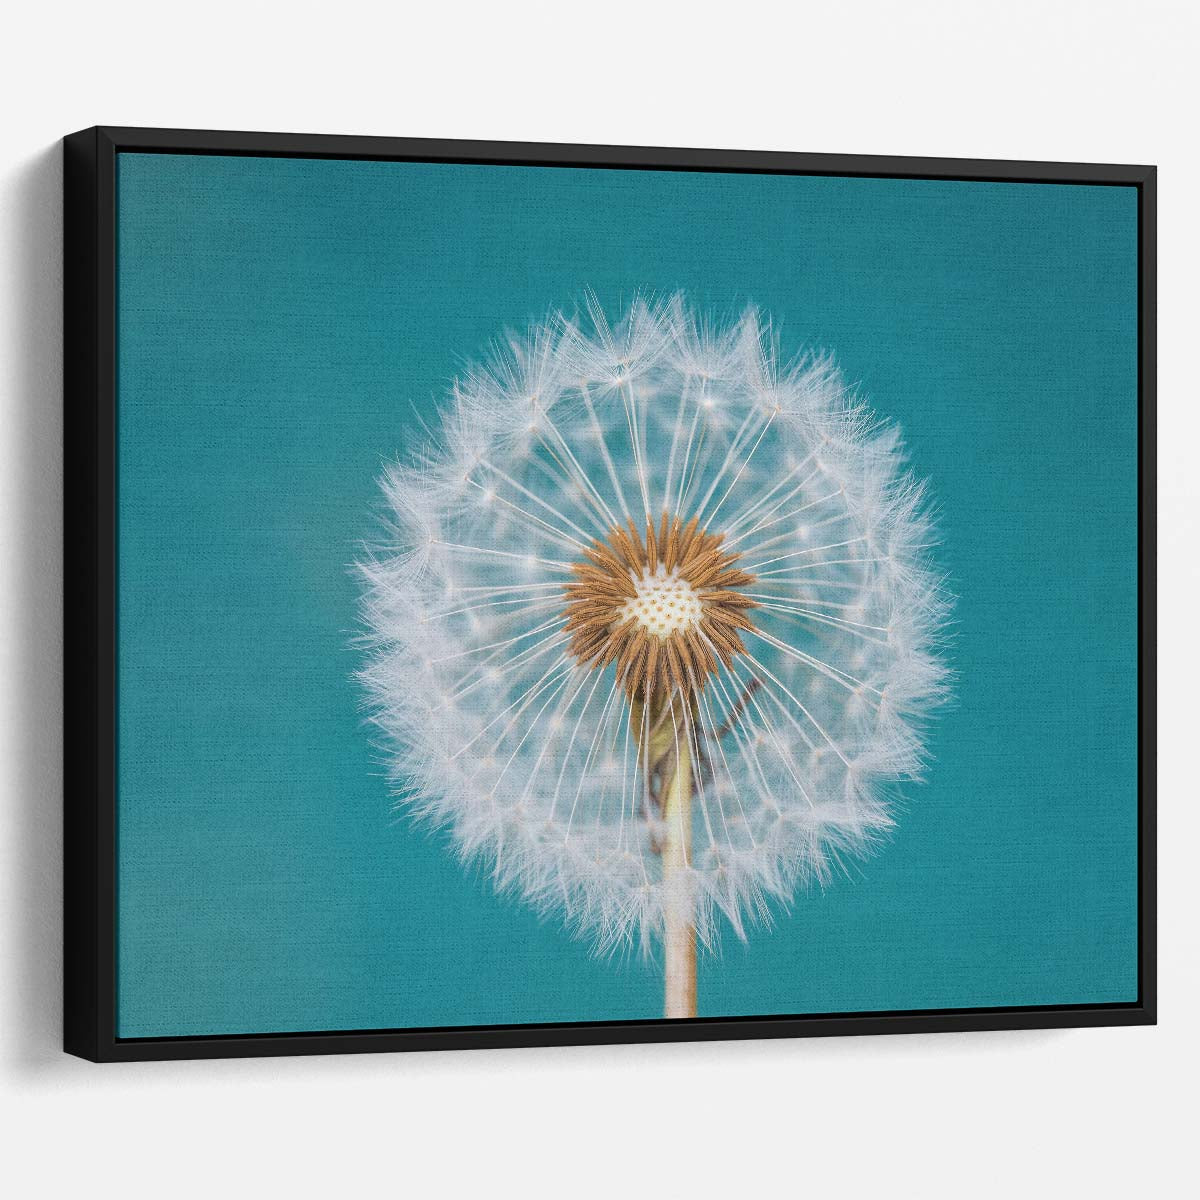 Turquoise Teal Dandelion Macro Floral Wall Art by Luxuriance Designs. Made in USA.